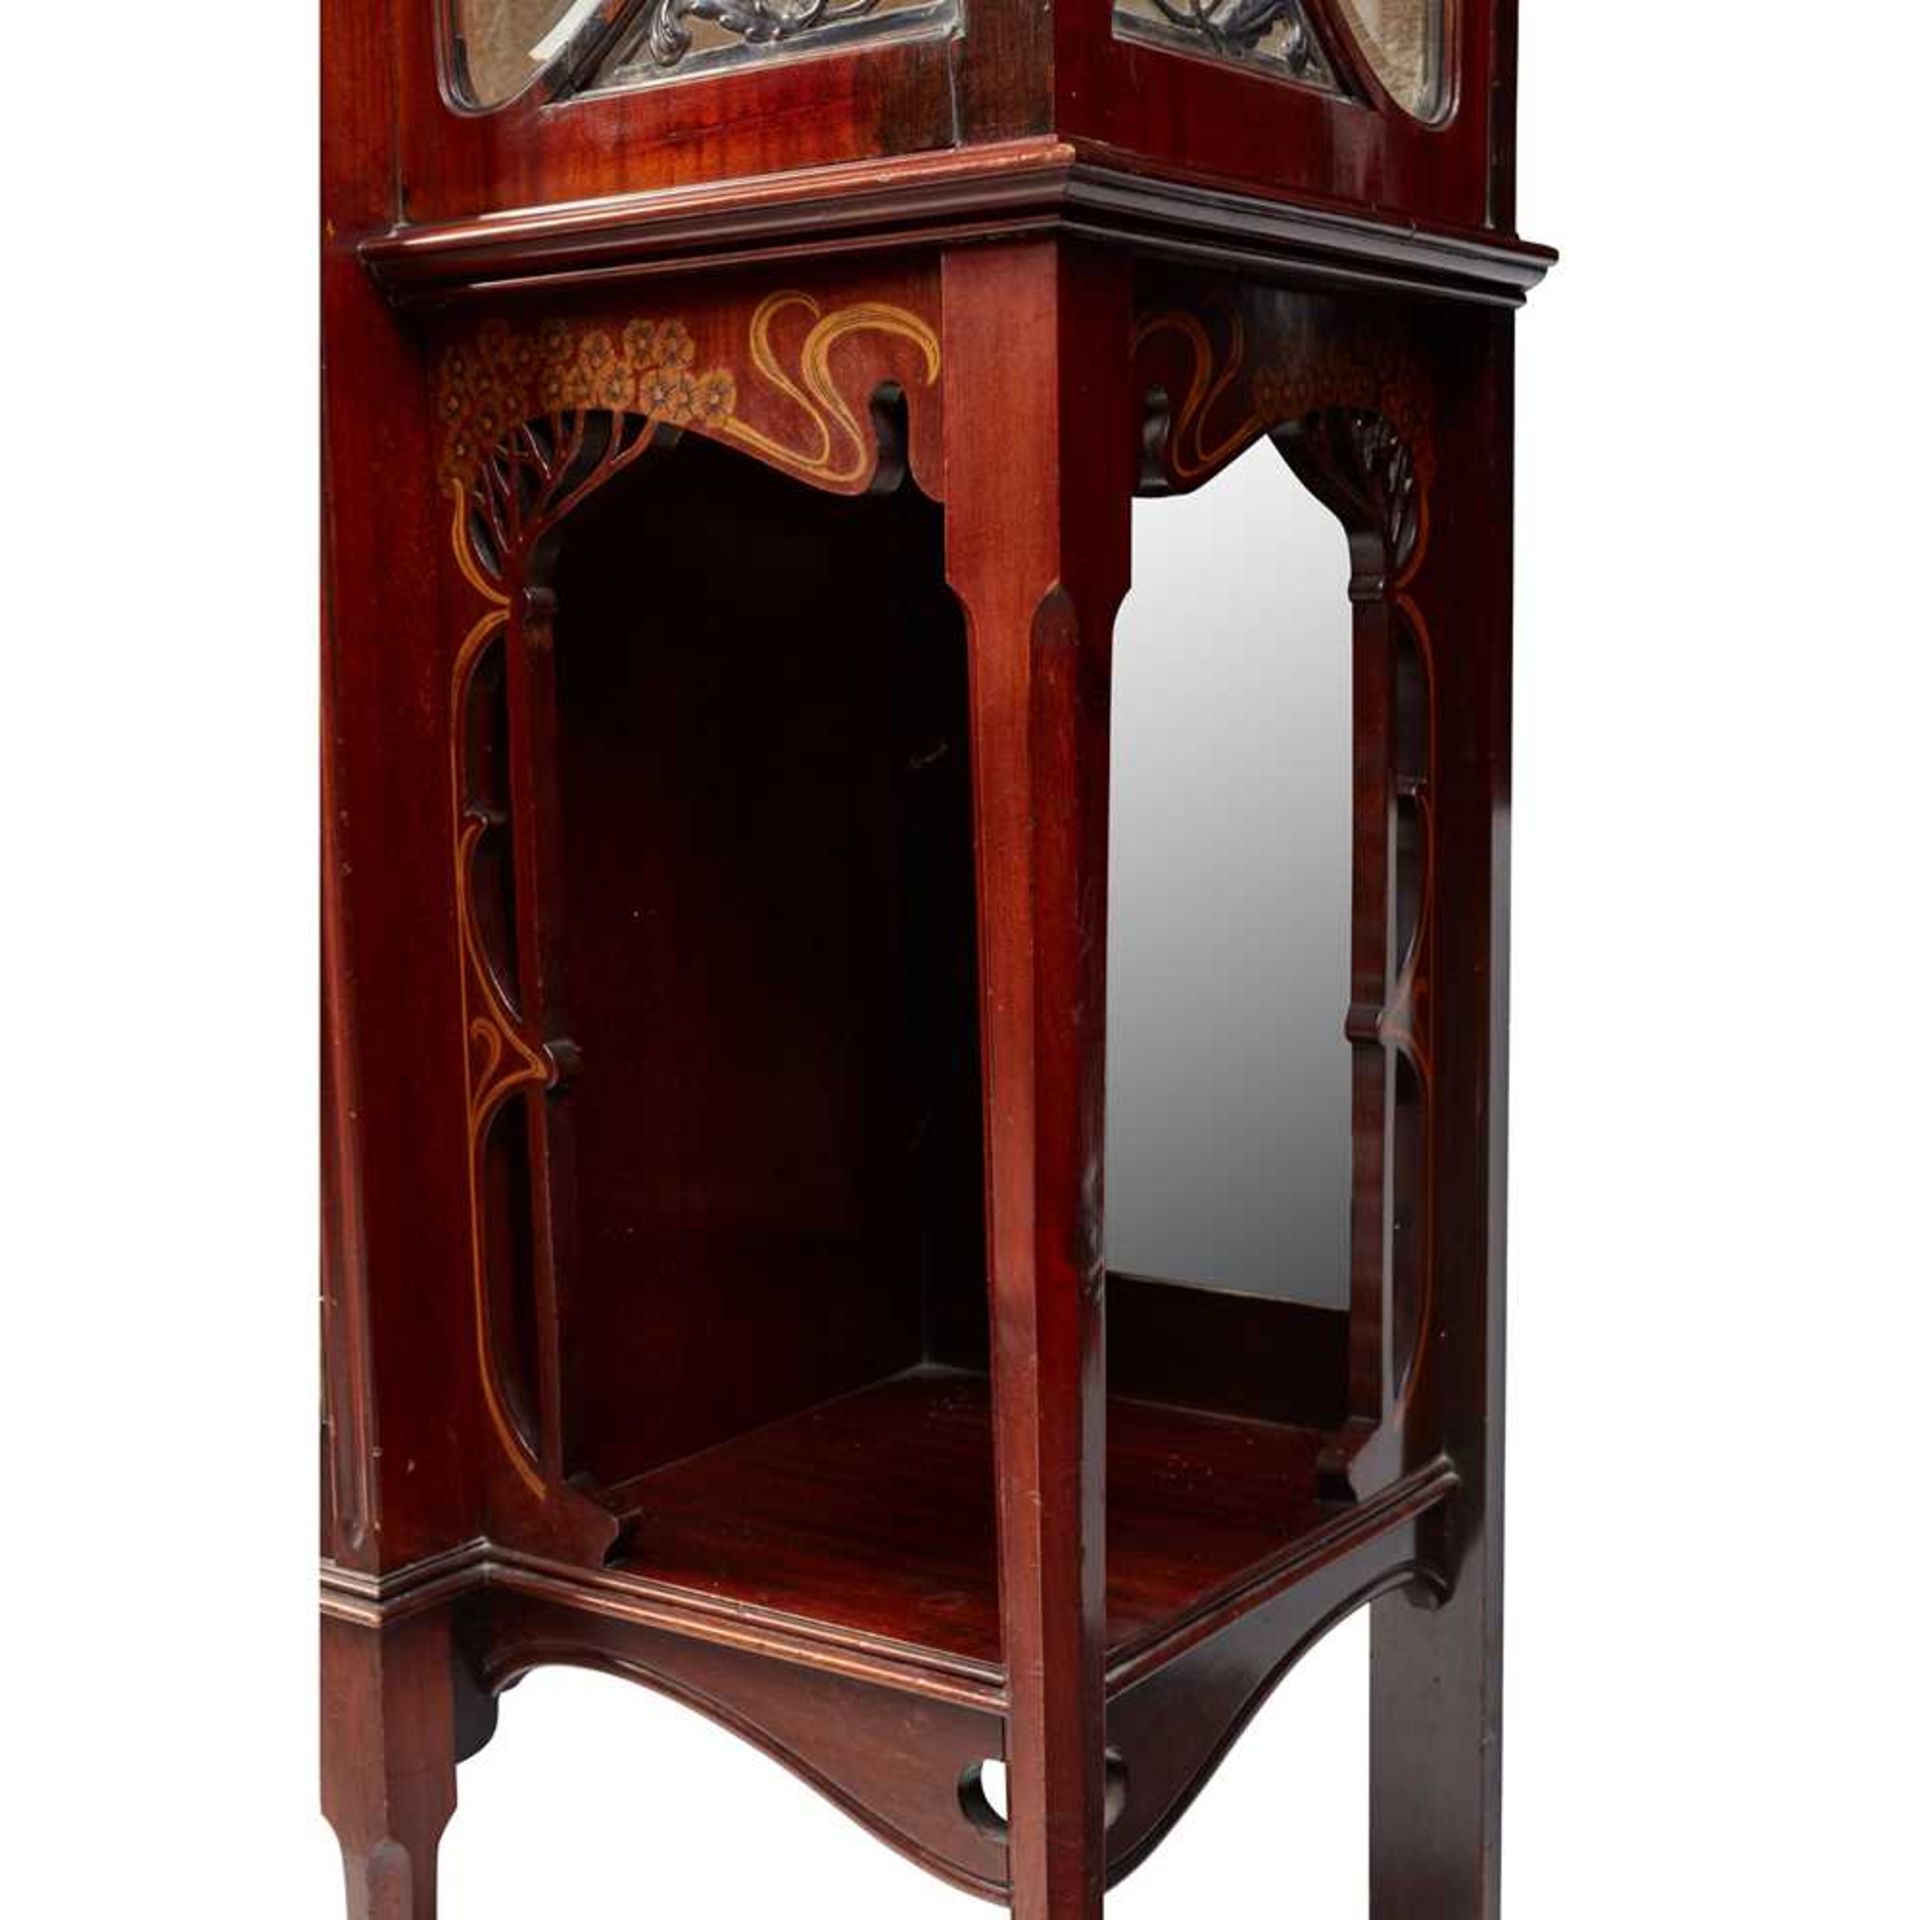 CHRISTOPHER PRATT AND SONS, BRADFORD (ATTRIBUTED TO) DISPLAY CABINET, CIRCA 1910 - Image 4 of 5